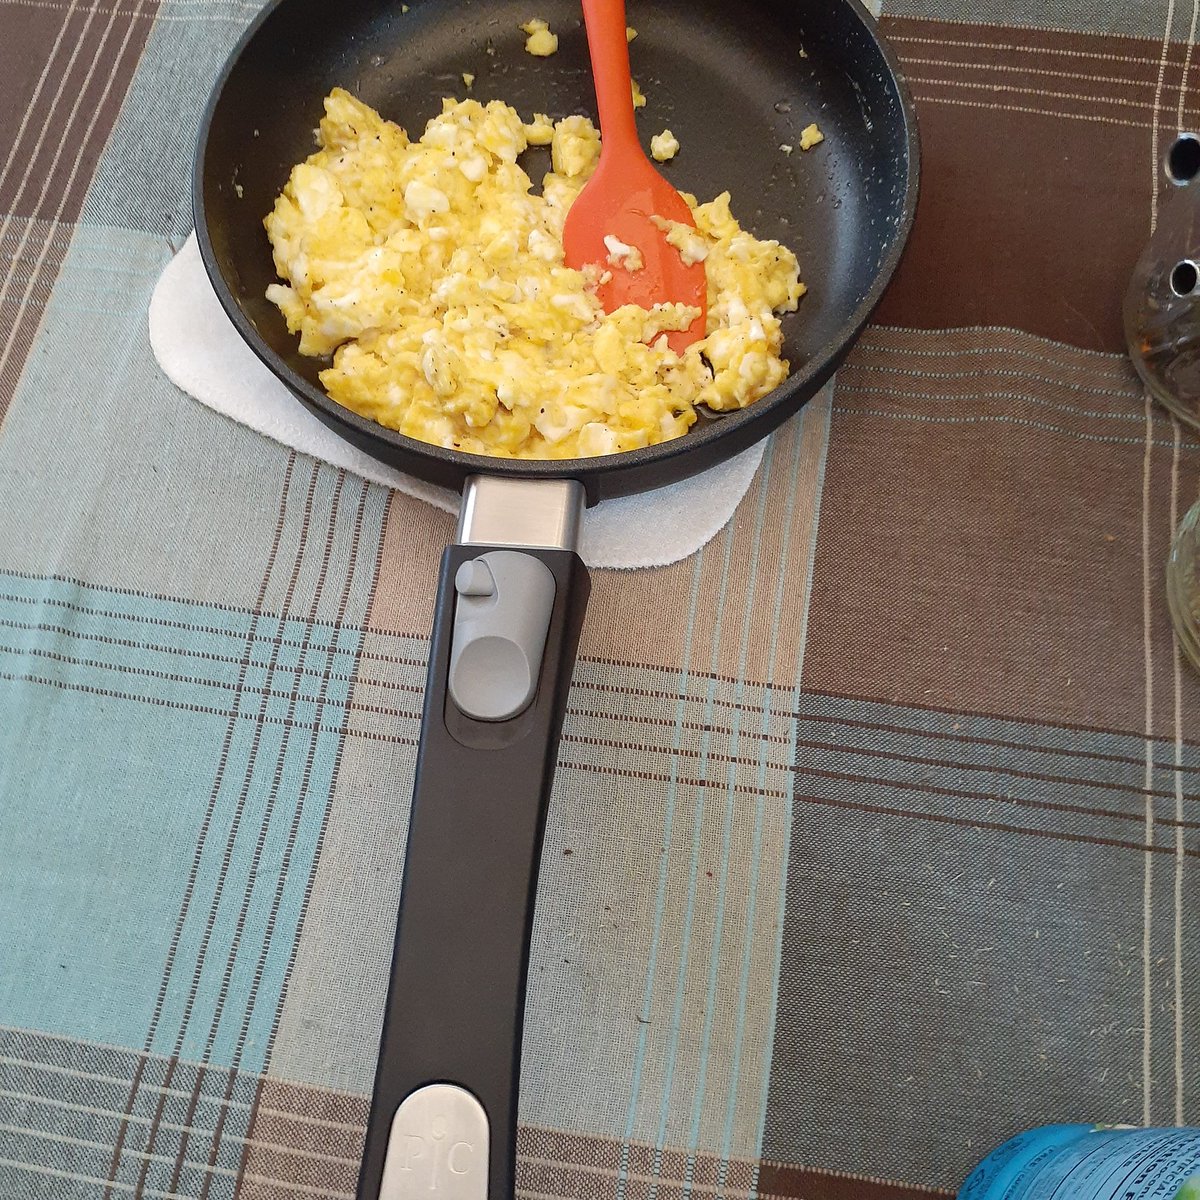 Breakfast at Burks' Base scrambled eggs made in the 8' nonstick fry pan

#pamperedchef #howipamperedchef #pamperedchefconsultant #foodie #food #mealideas #foodblog #yummy #foodforkids #raisingfoodies #foodphotography #chef #kitchenfun #onemealonememory #busymom #sahm #sahmlife